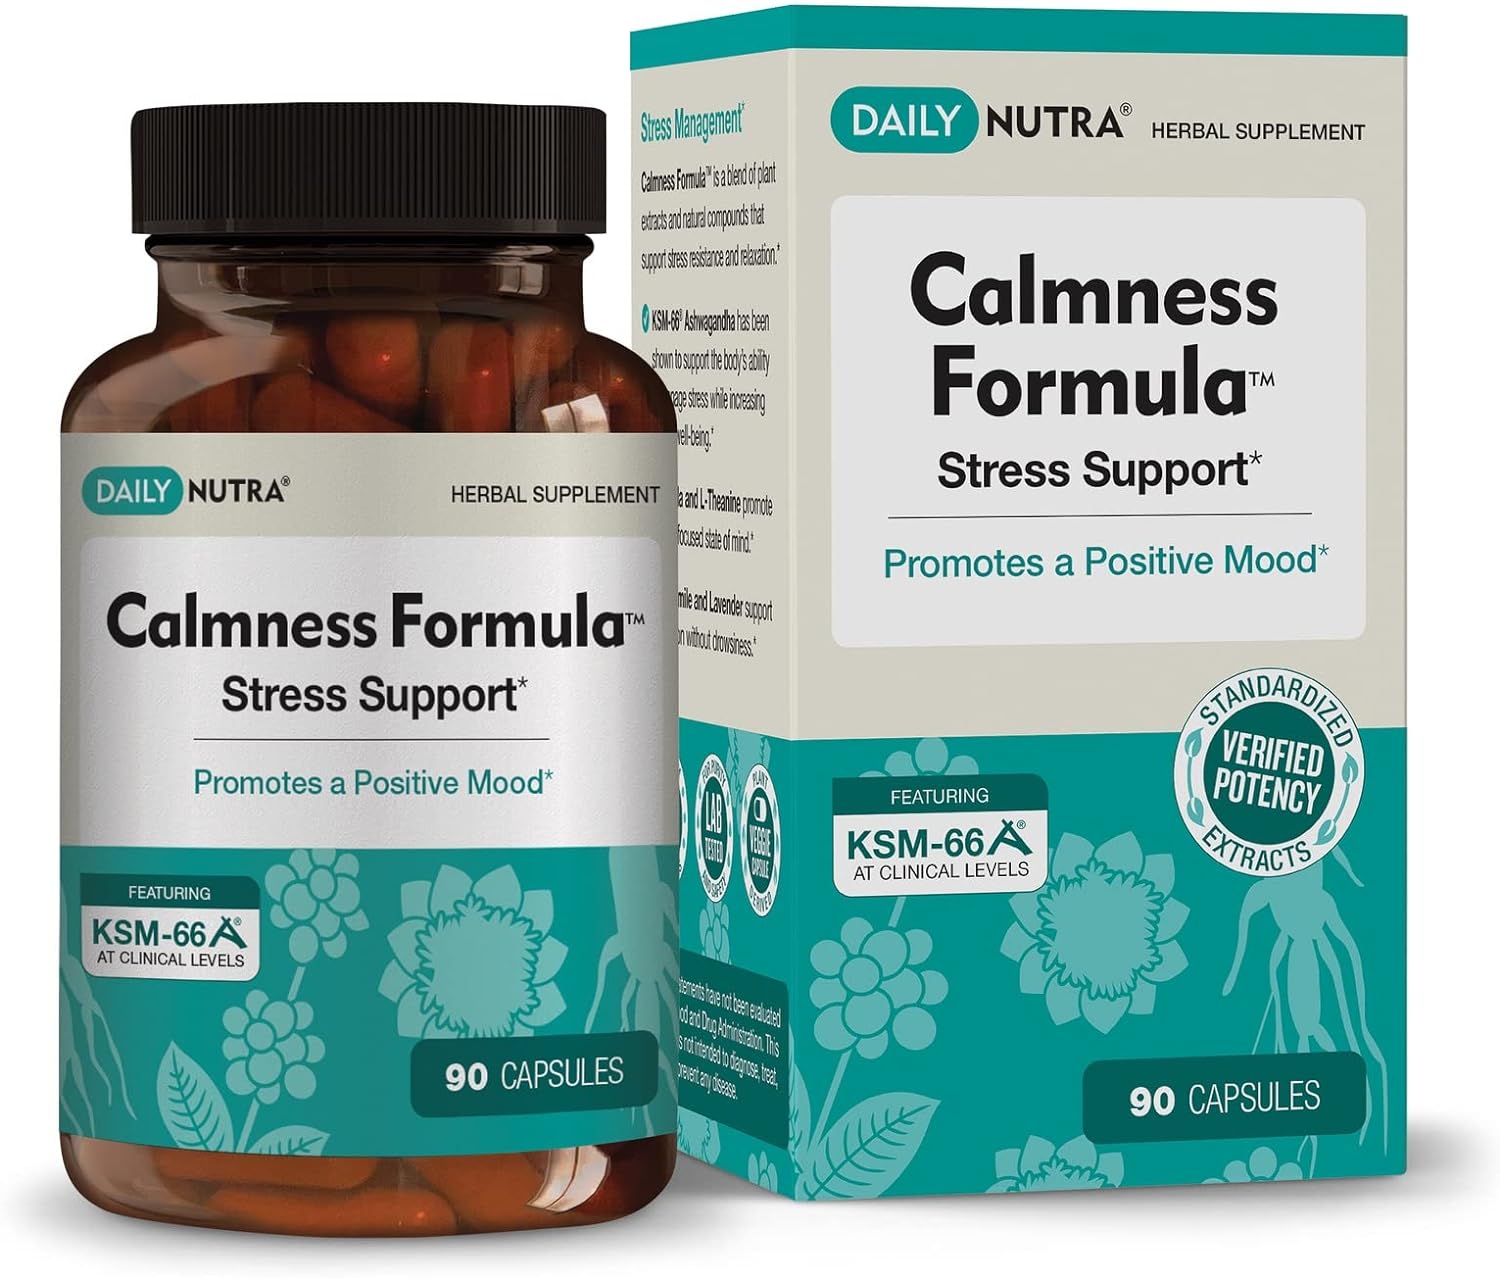 DailyNutra Calmness Formula - Stress and Worry Support Supplement - Promotes a Natural Calm Mood | Effective & Safe - Featuring Clinically Studied KSM-66 Ashwagandha (90 Capsules)